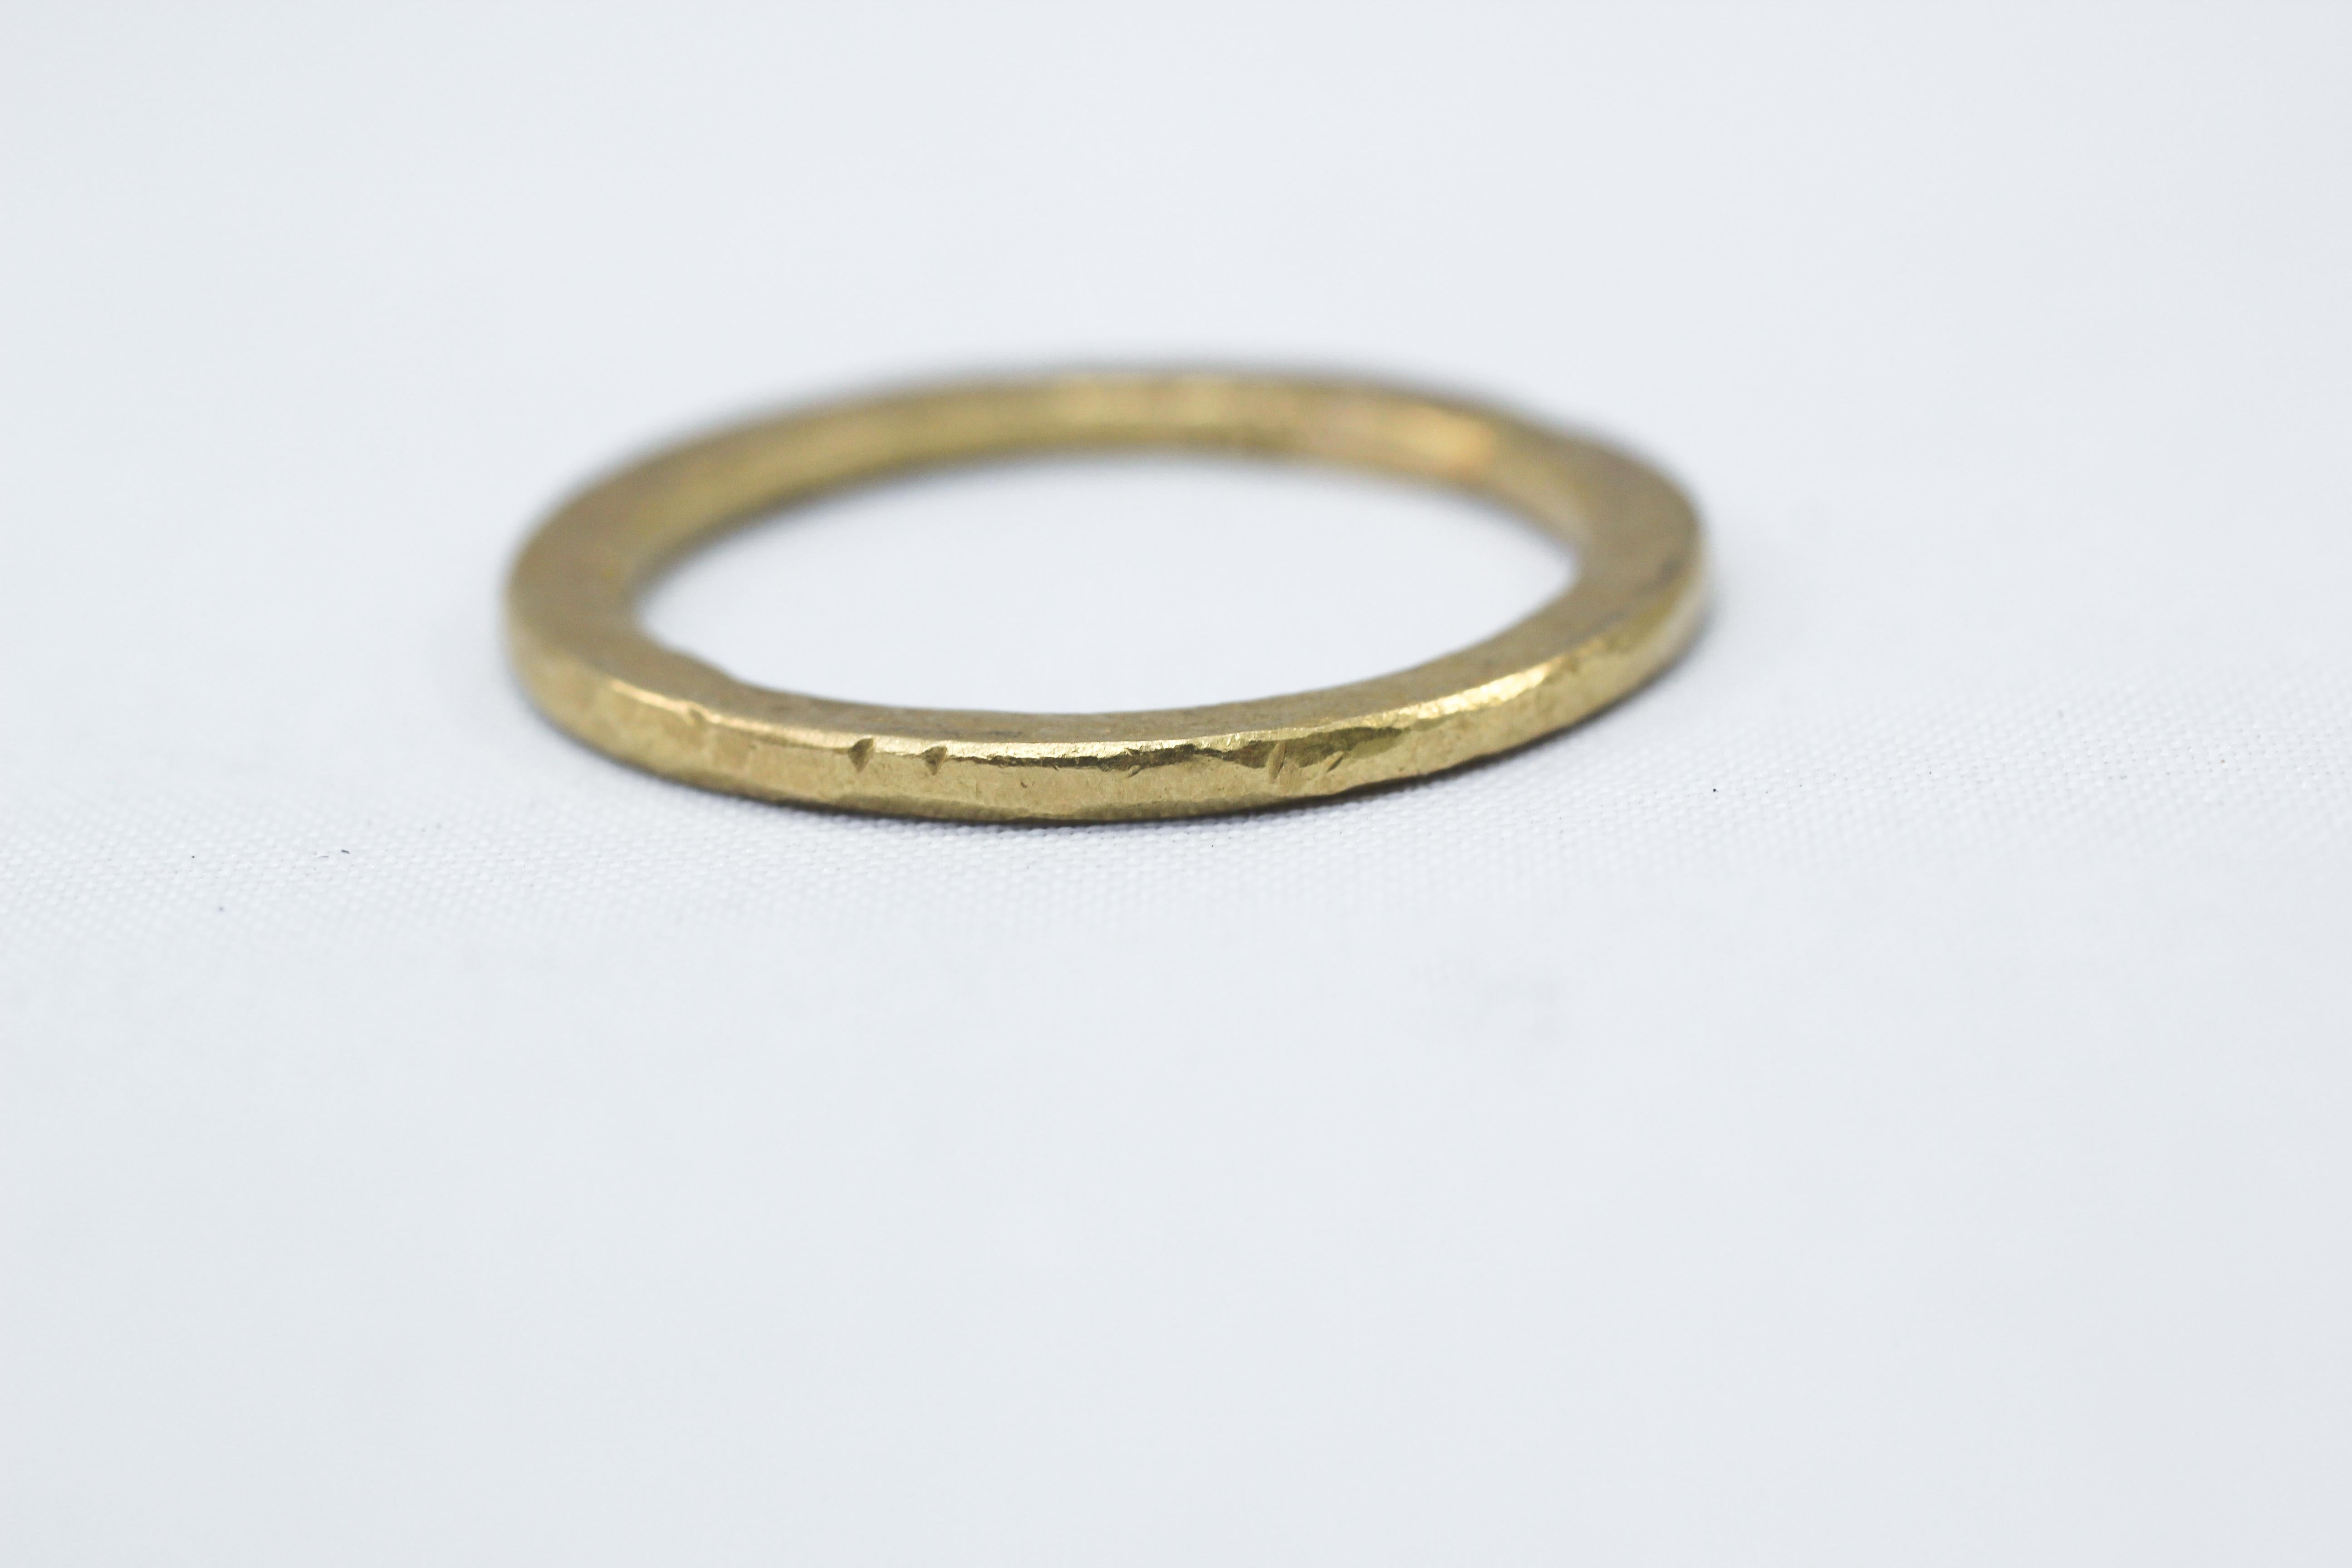 A unisex wedding band ring in recycled 21k gold. Simplicity Small band contemporary unisex design. This wedding band can be worn individually or stacked with other designs on the AB Jewelry NYC page.

As an example of more fashion ideas pictured